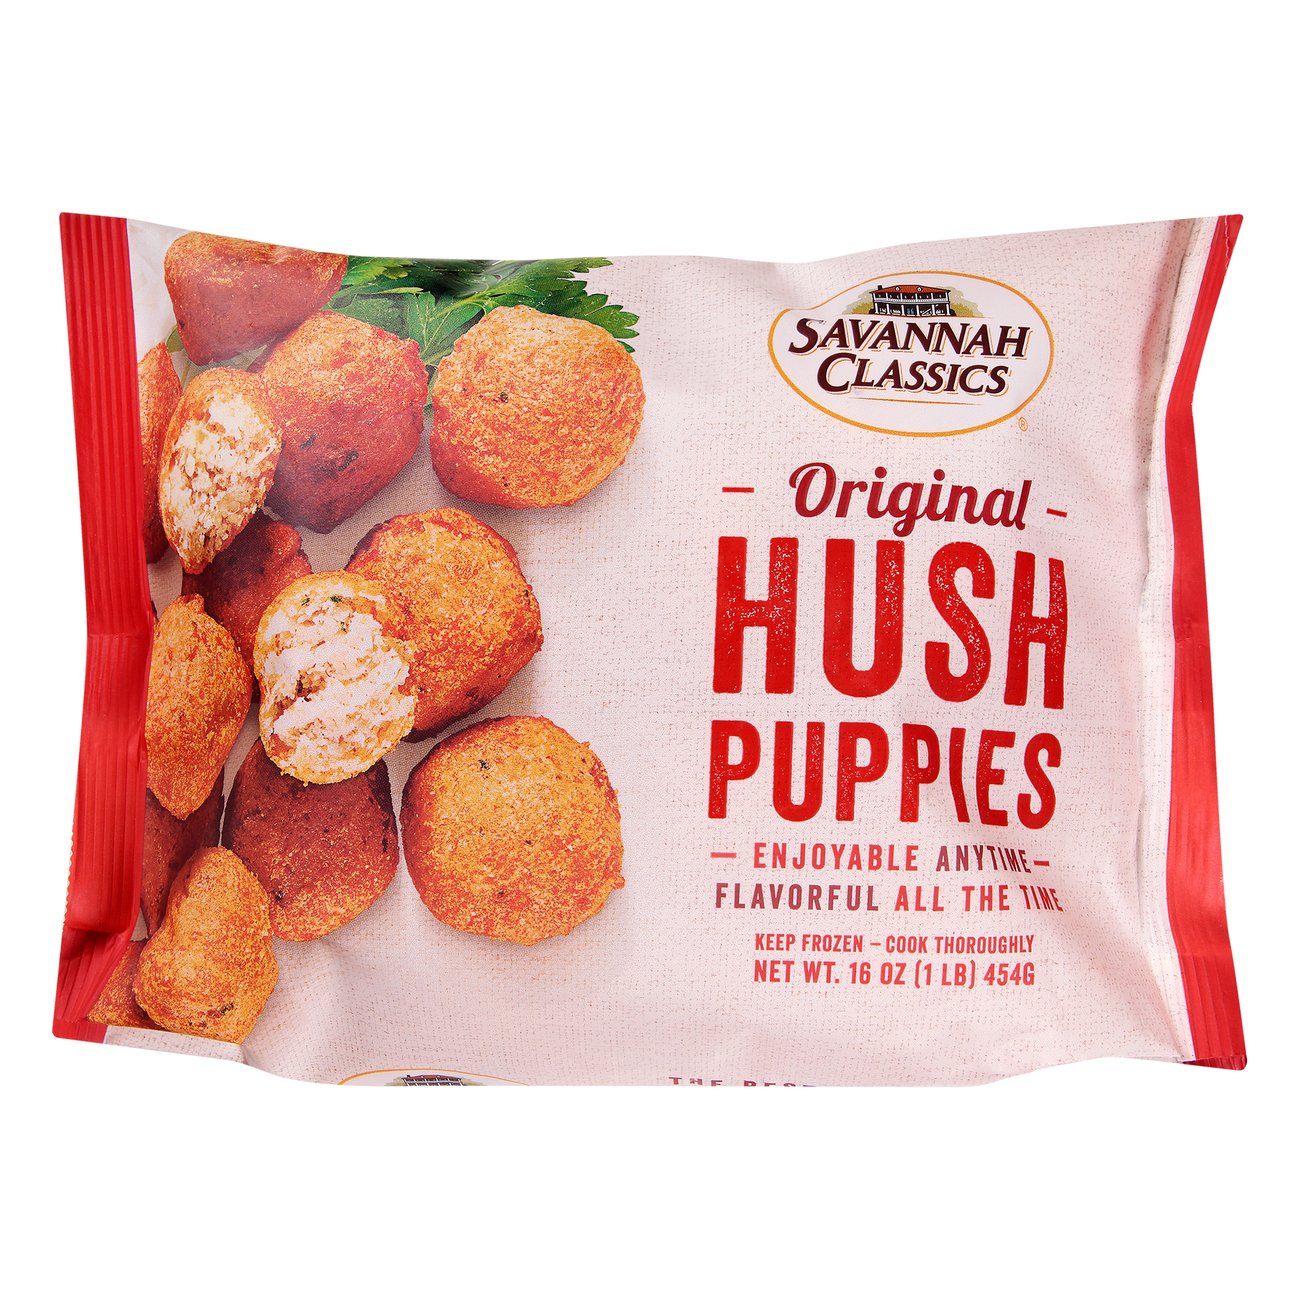 where are hush puppies made